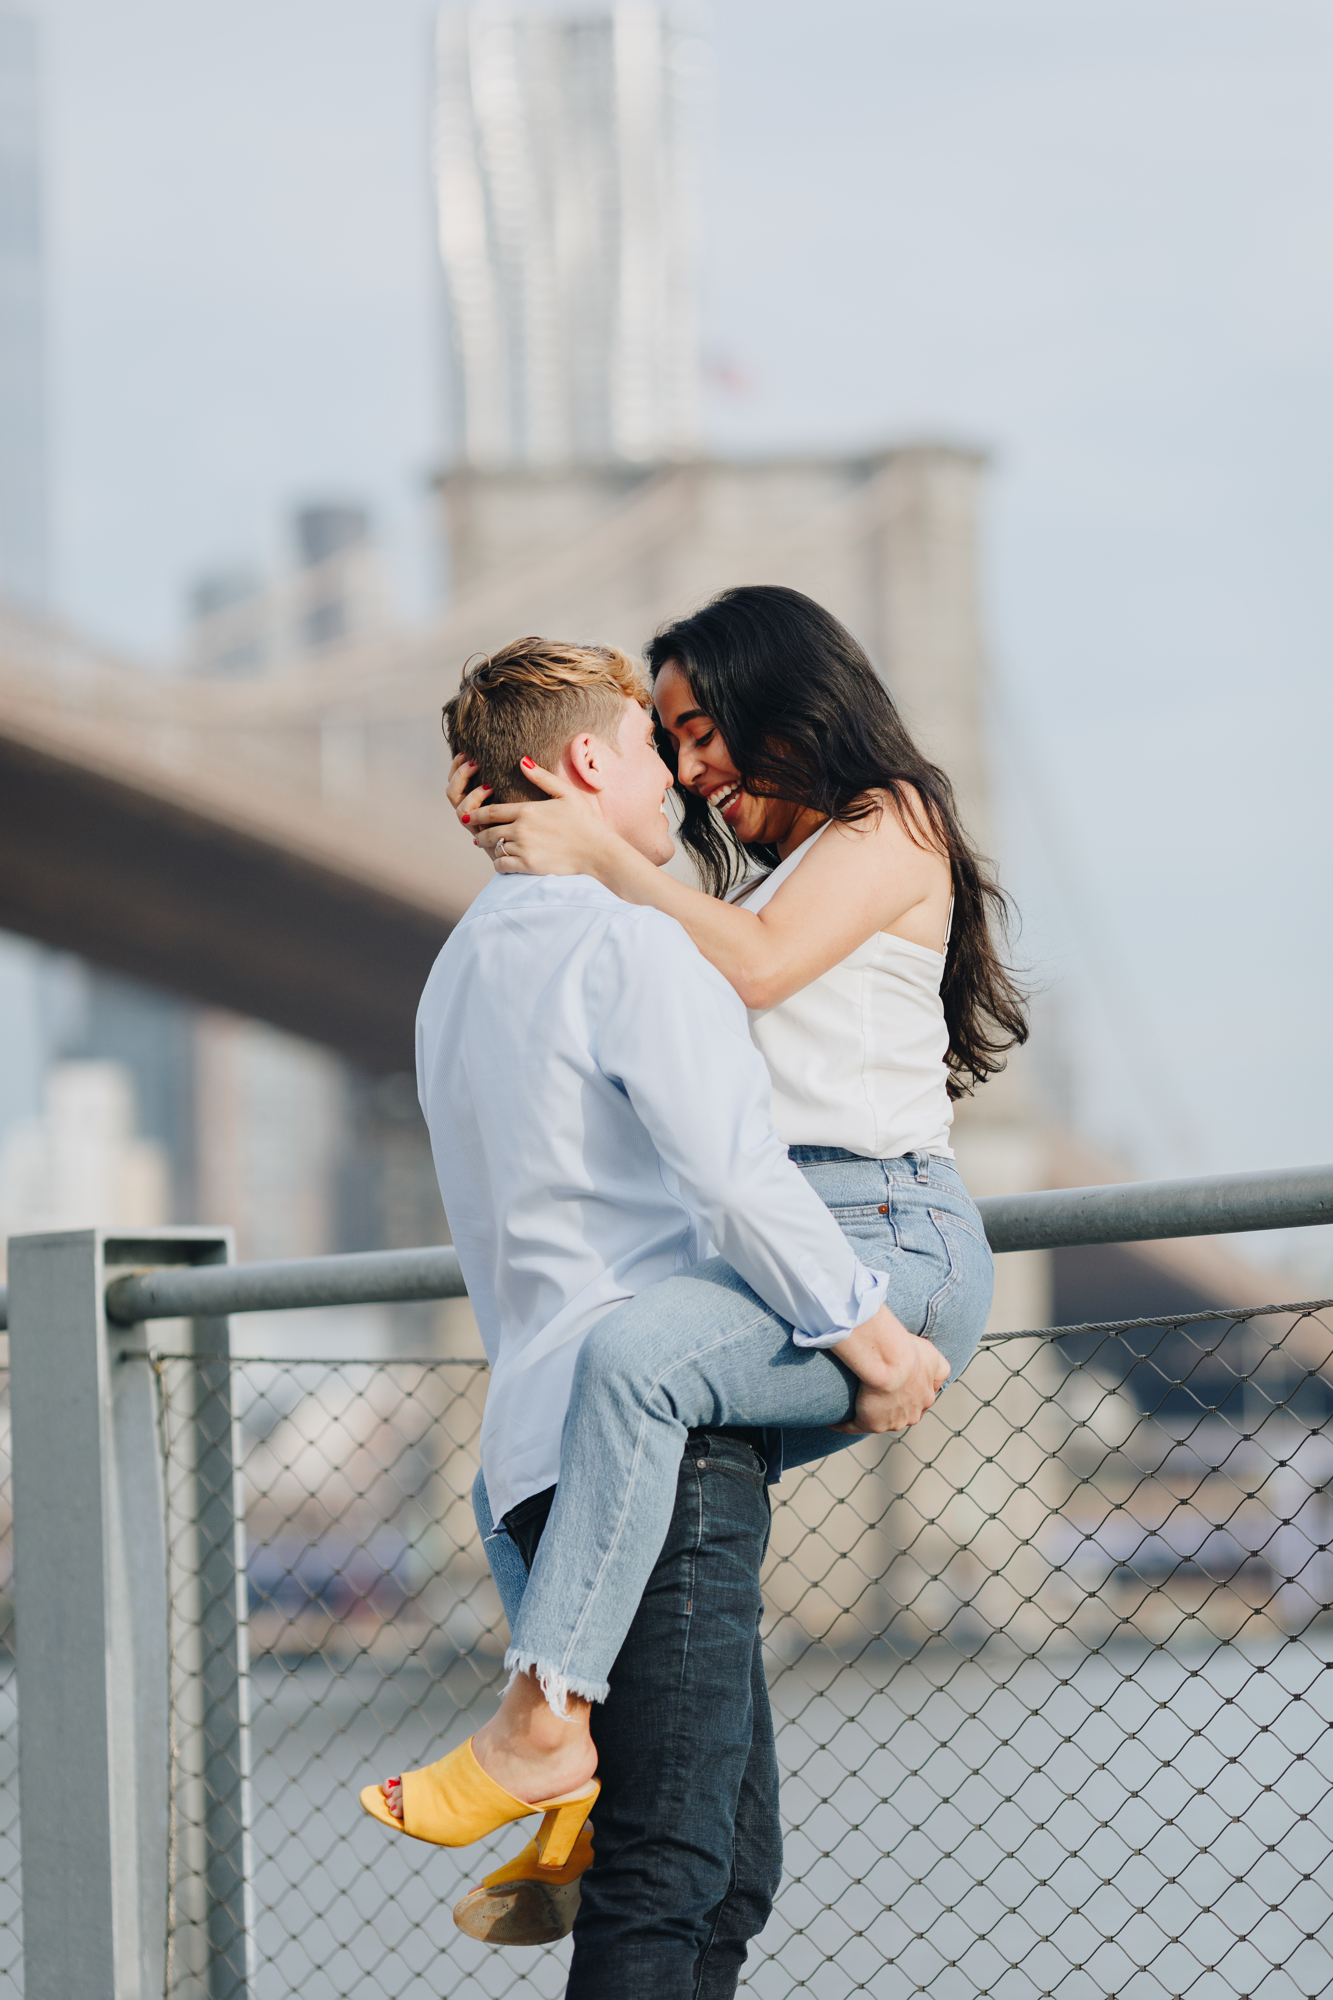 Stunning Engagement Photo Locations in New York City